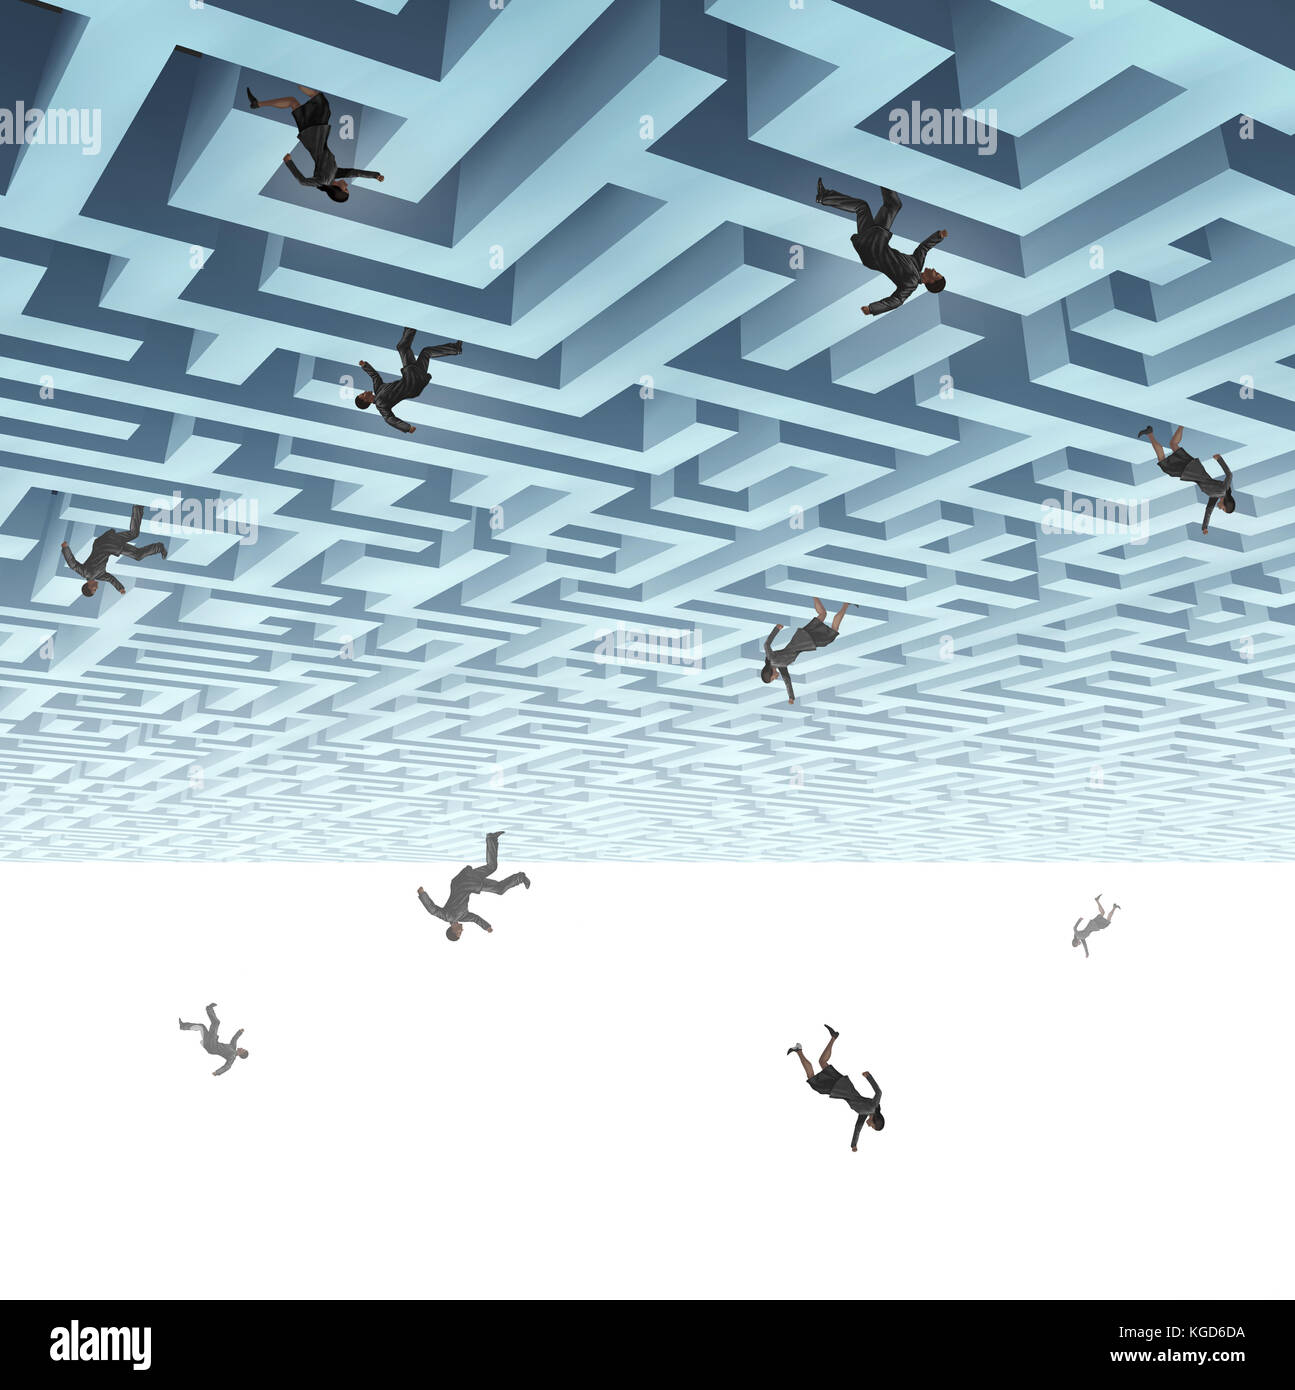 Falling down business people and economic turmoil metaphor as a group of businesswomen and businessman plunging from a maze with 3D render elements. Stock Photo